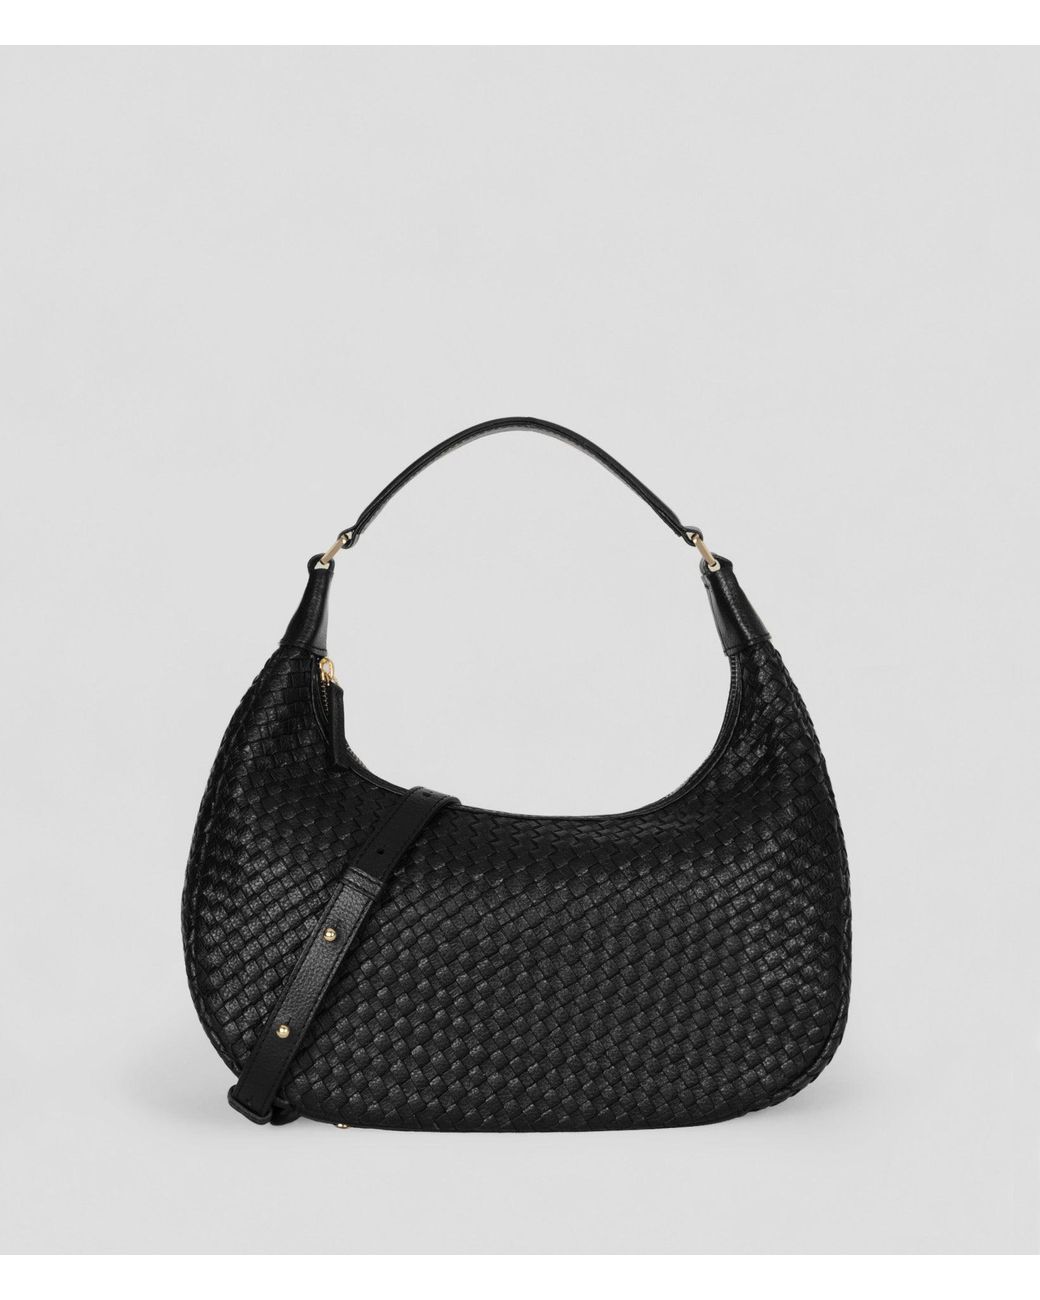 Wilsons Leather Monty Woven Leather Shoulder Bag in Black | Lyst